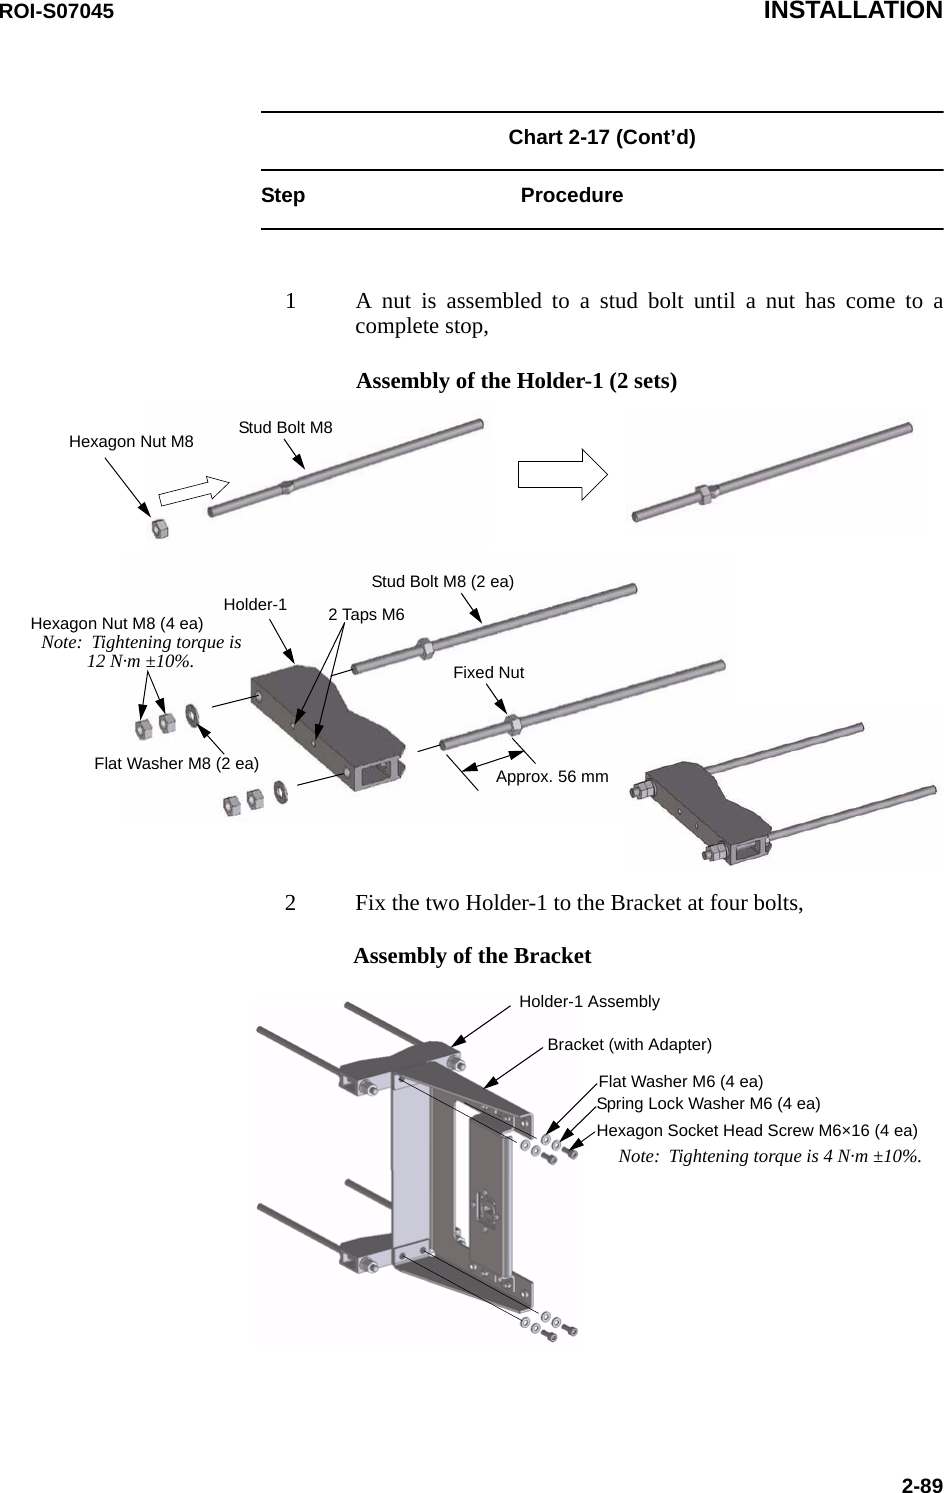 ROI-S07045 INSTALLATION2-89Chart 2-17 (Cont’d) Step Procedure1 A nut is assembled to a stud bolt until a nut has come to acomplete stop,2 Fix the two Holder-1 to the Bracket at four bolts,Stud Bolt M8Hexagon Nut M8Hexagon Nut M8 (4 ea)Stud Bolt M8 (2 ea)Fixed NutApprox. 56 mmHolder-1Flat Washer M8 (2 ea)Note:  Tightening torque is12 N·m ±10%.Assembly of the Holder-1 (2 sets)2 Taps M6Assembly of the BracketHolder-1 AssemblyBracket (with Adapter)Flat Washer M6 (4 ea)Spring Lock Washer M6 (4 ea)Hexagon Socket Head Screw M6×16 (4 ea)Note:  Tightening torque is 4 N·m ±10%.